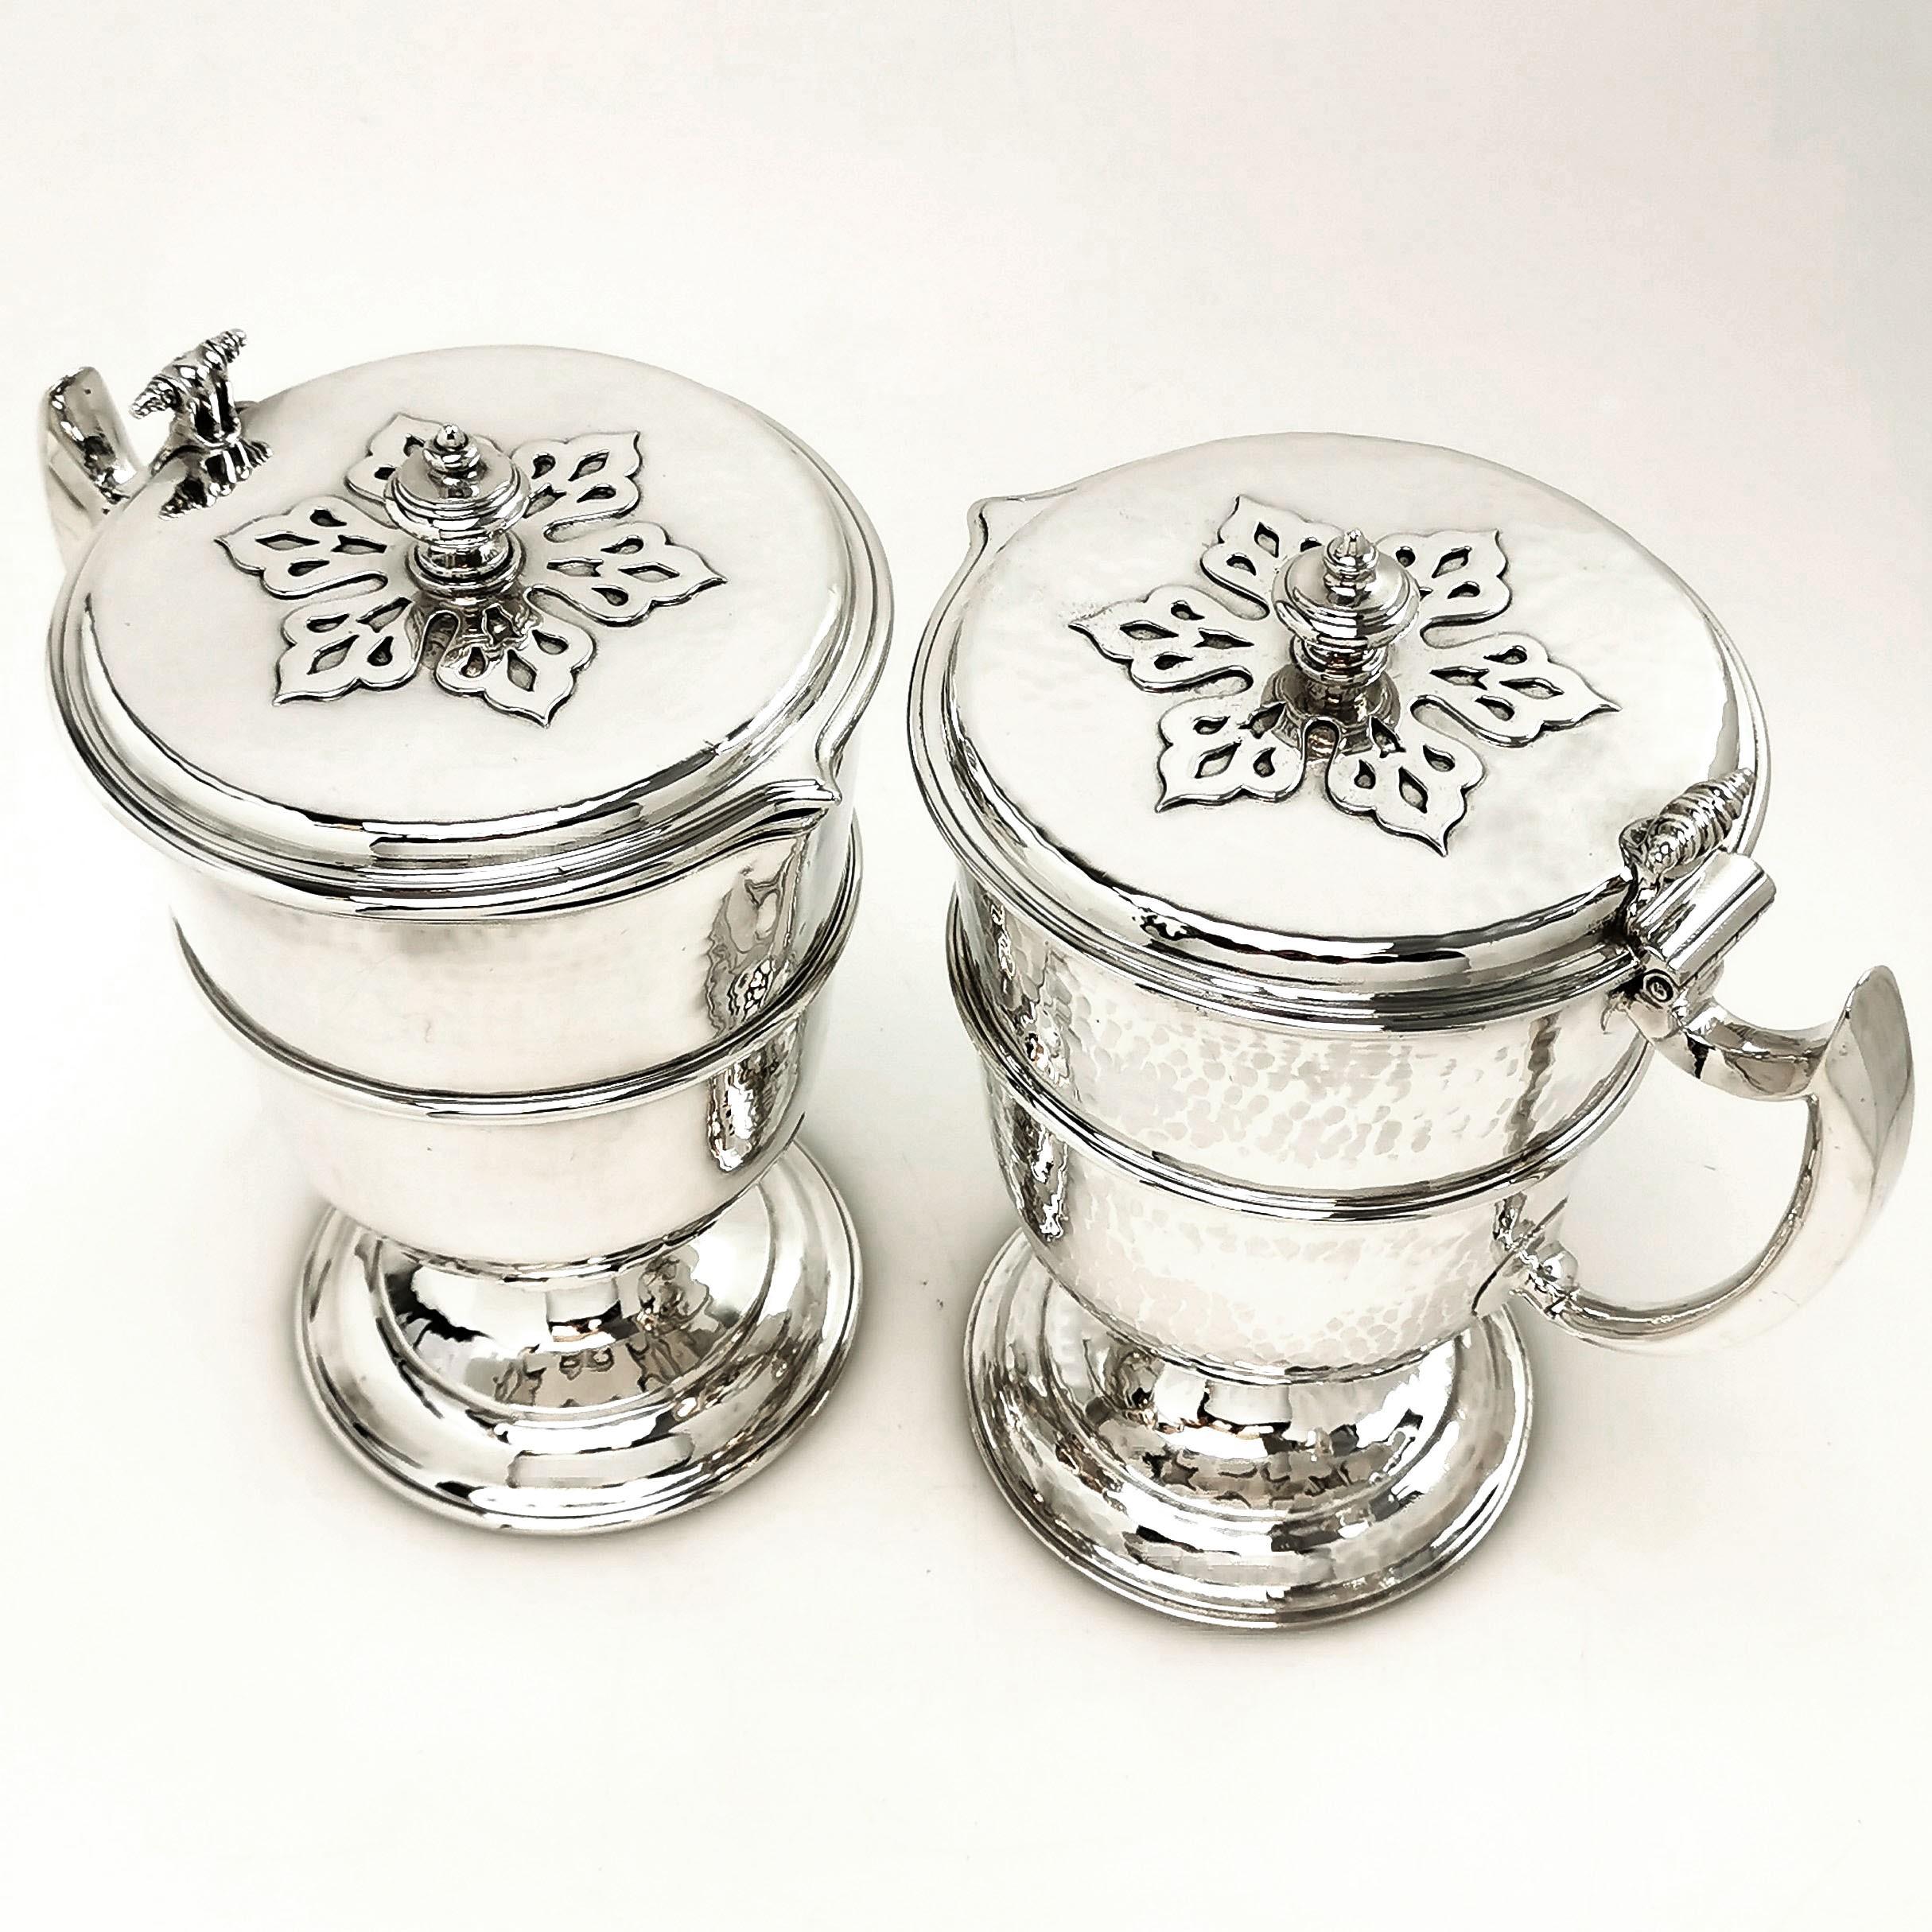 A gorgeous pair of Antique Solid Silver Jugs created in the style of William and Mary late 17th century style. Each Jug has a hinged lid with an applied pattern on the lid. The bodies feature a delicate hammered effect and each jug stands on spread